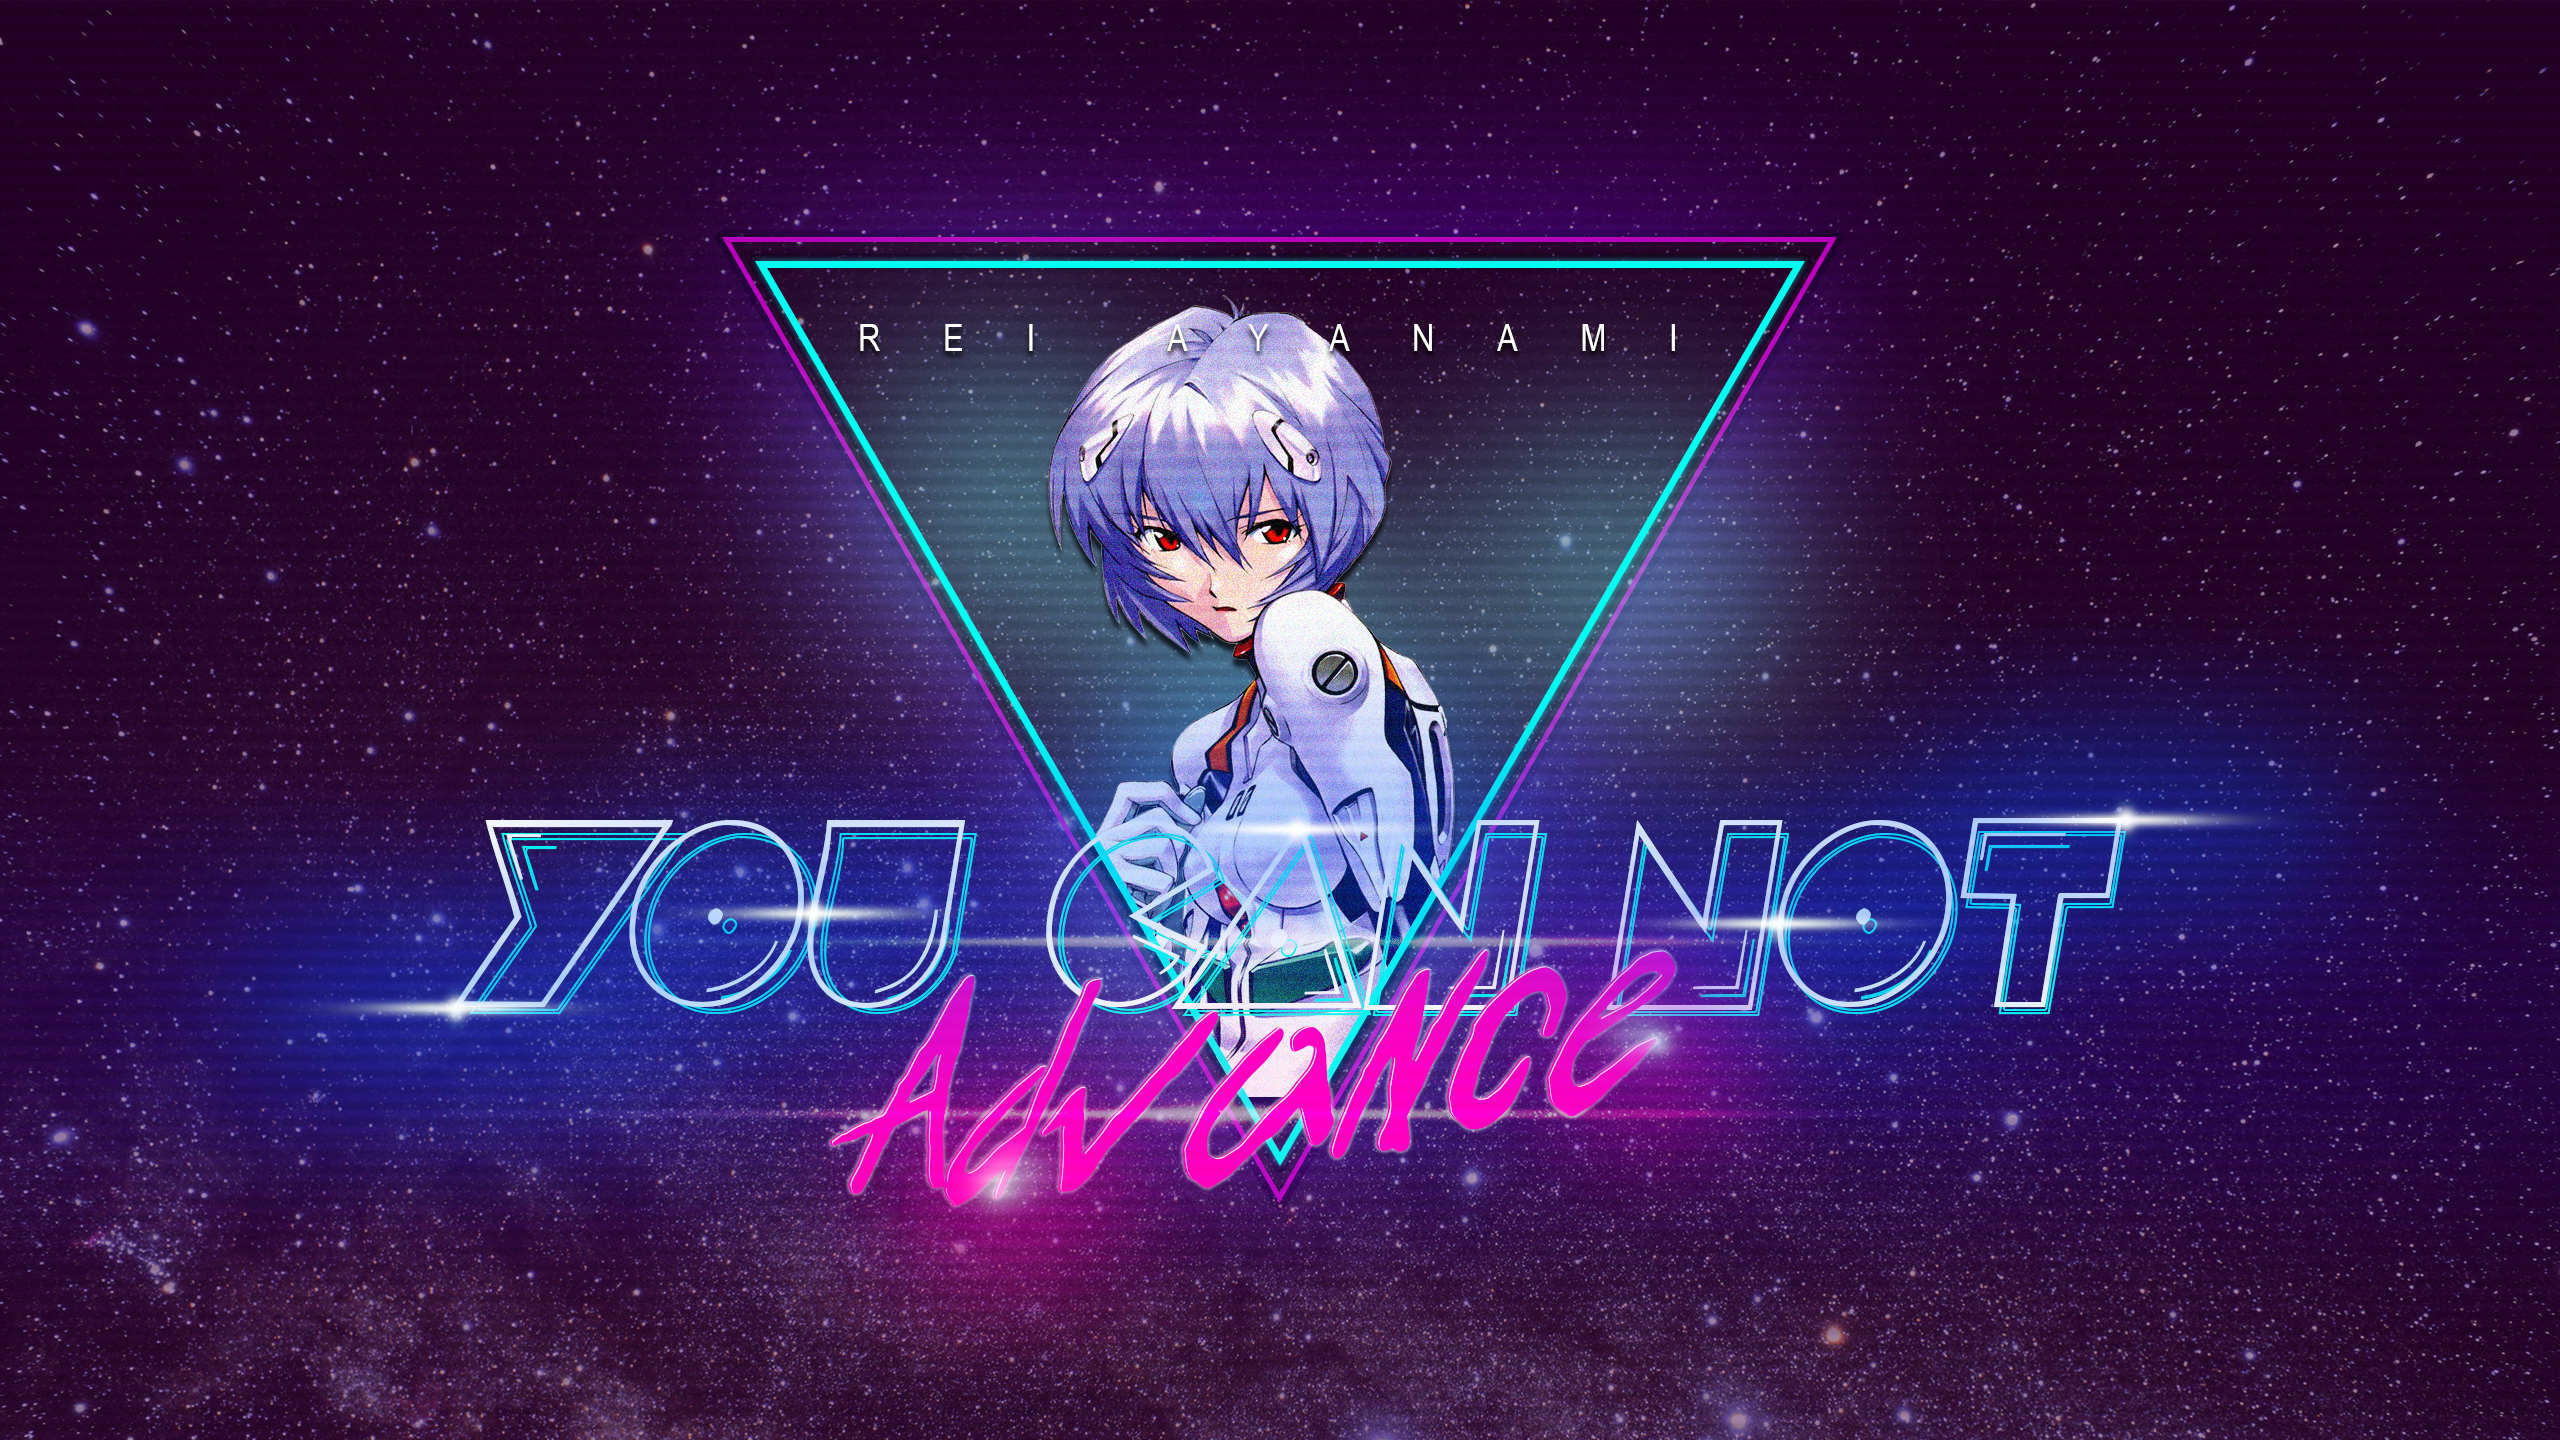 Rei Ayanami HD Wallpaper  Background Image 2560x1440 